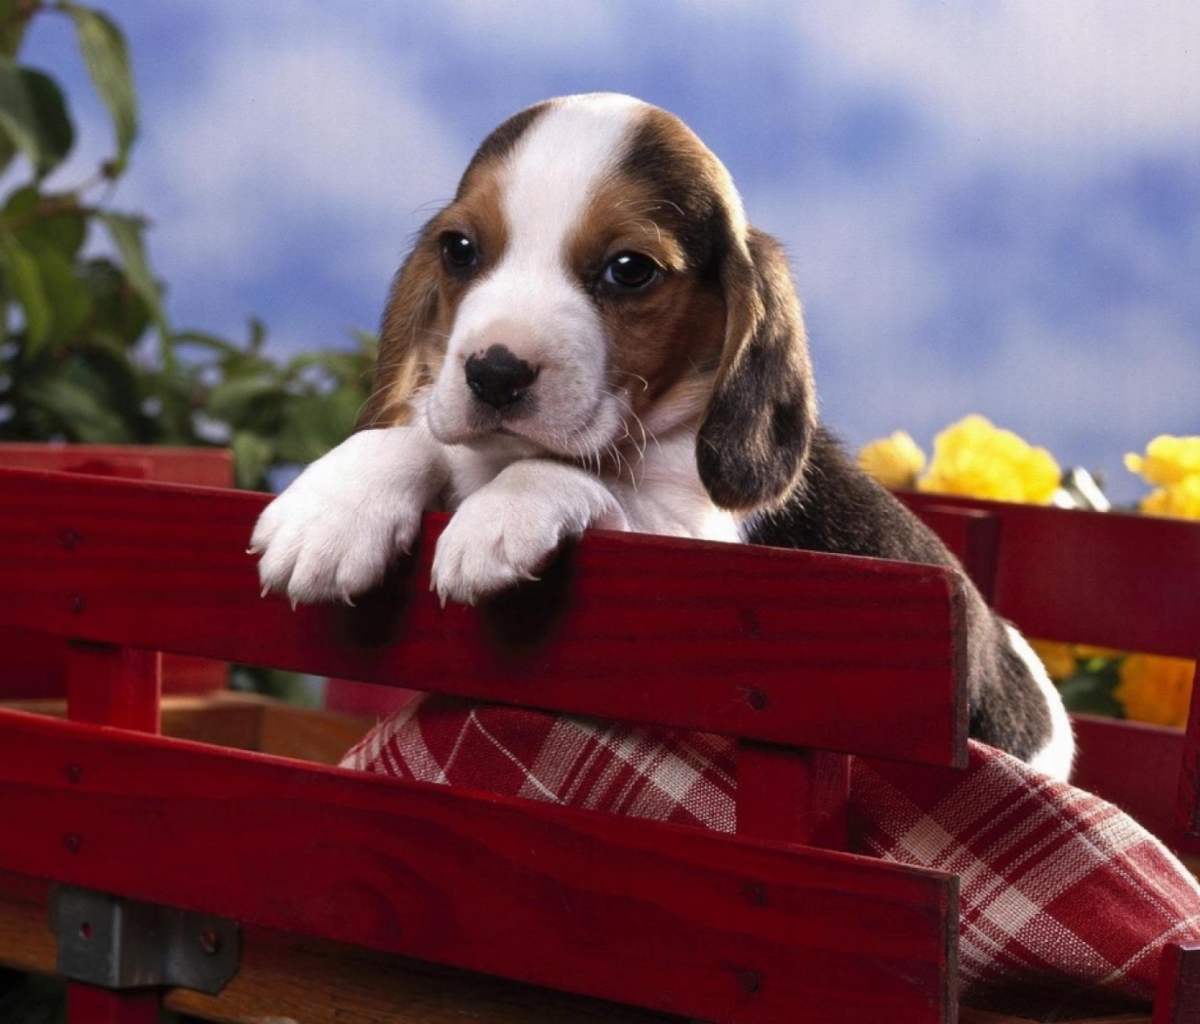 Puppy On Red Bench wallpaper 1200x1024